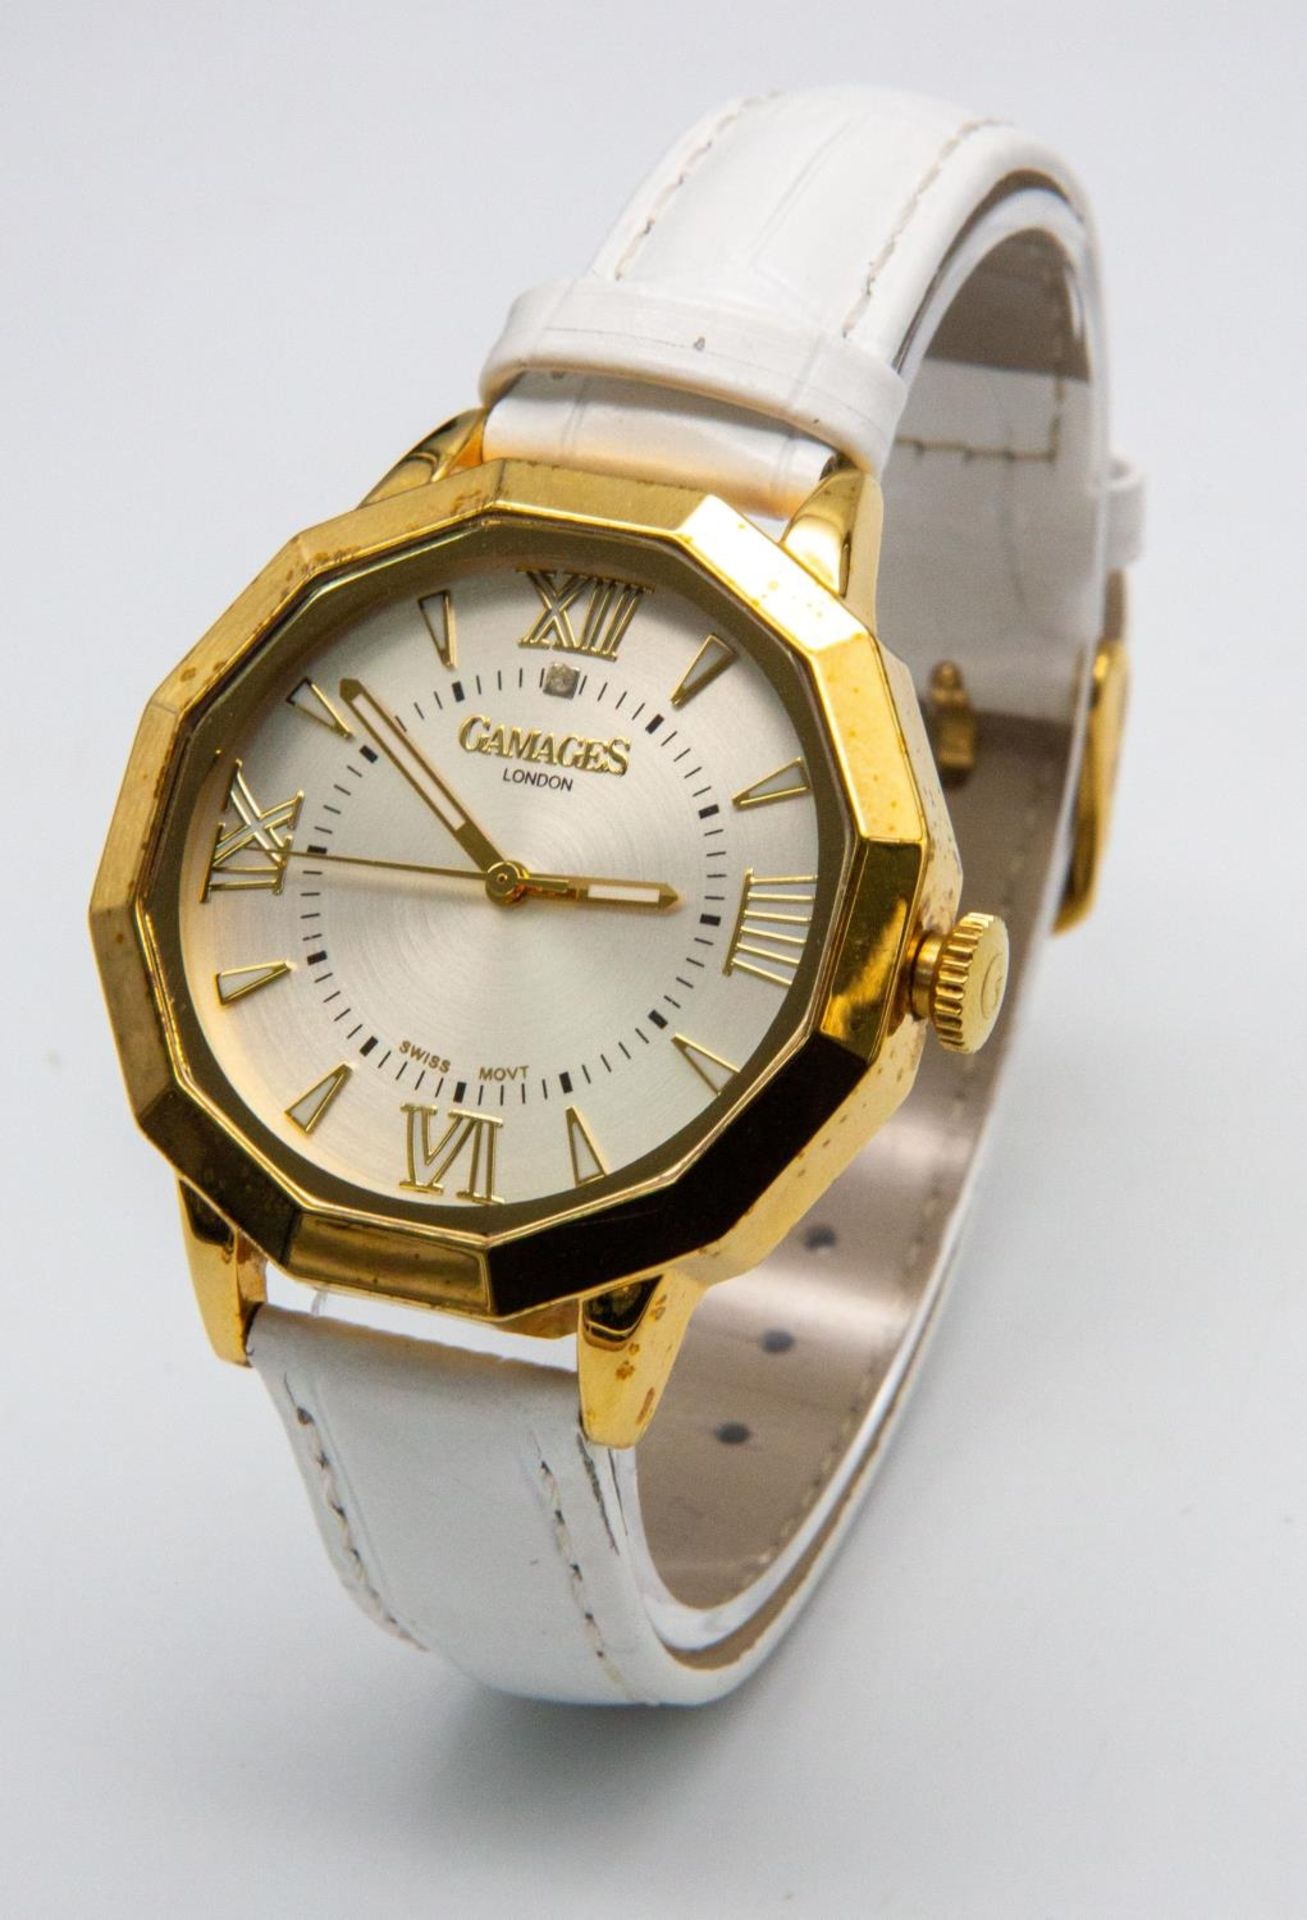 A Gamages of London Quartz Ladies Watch. White leather strap. Gilded case - 38mm. Silver tone - Image 5 of 5